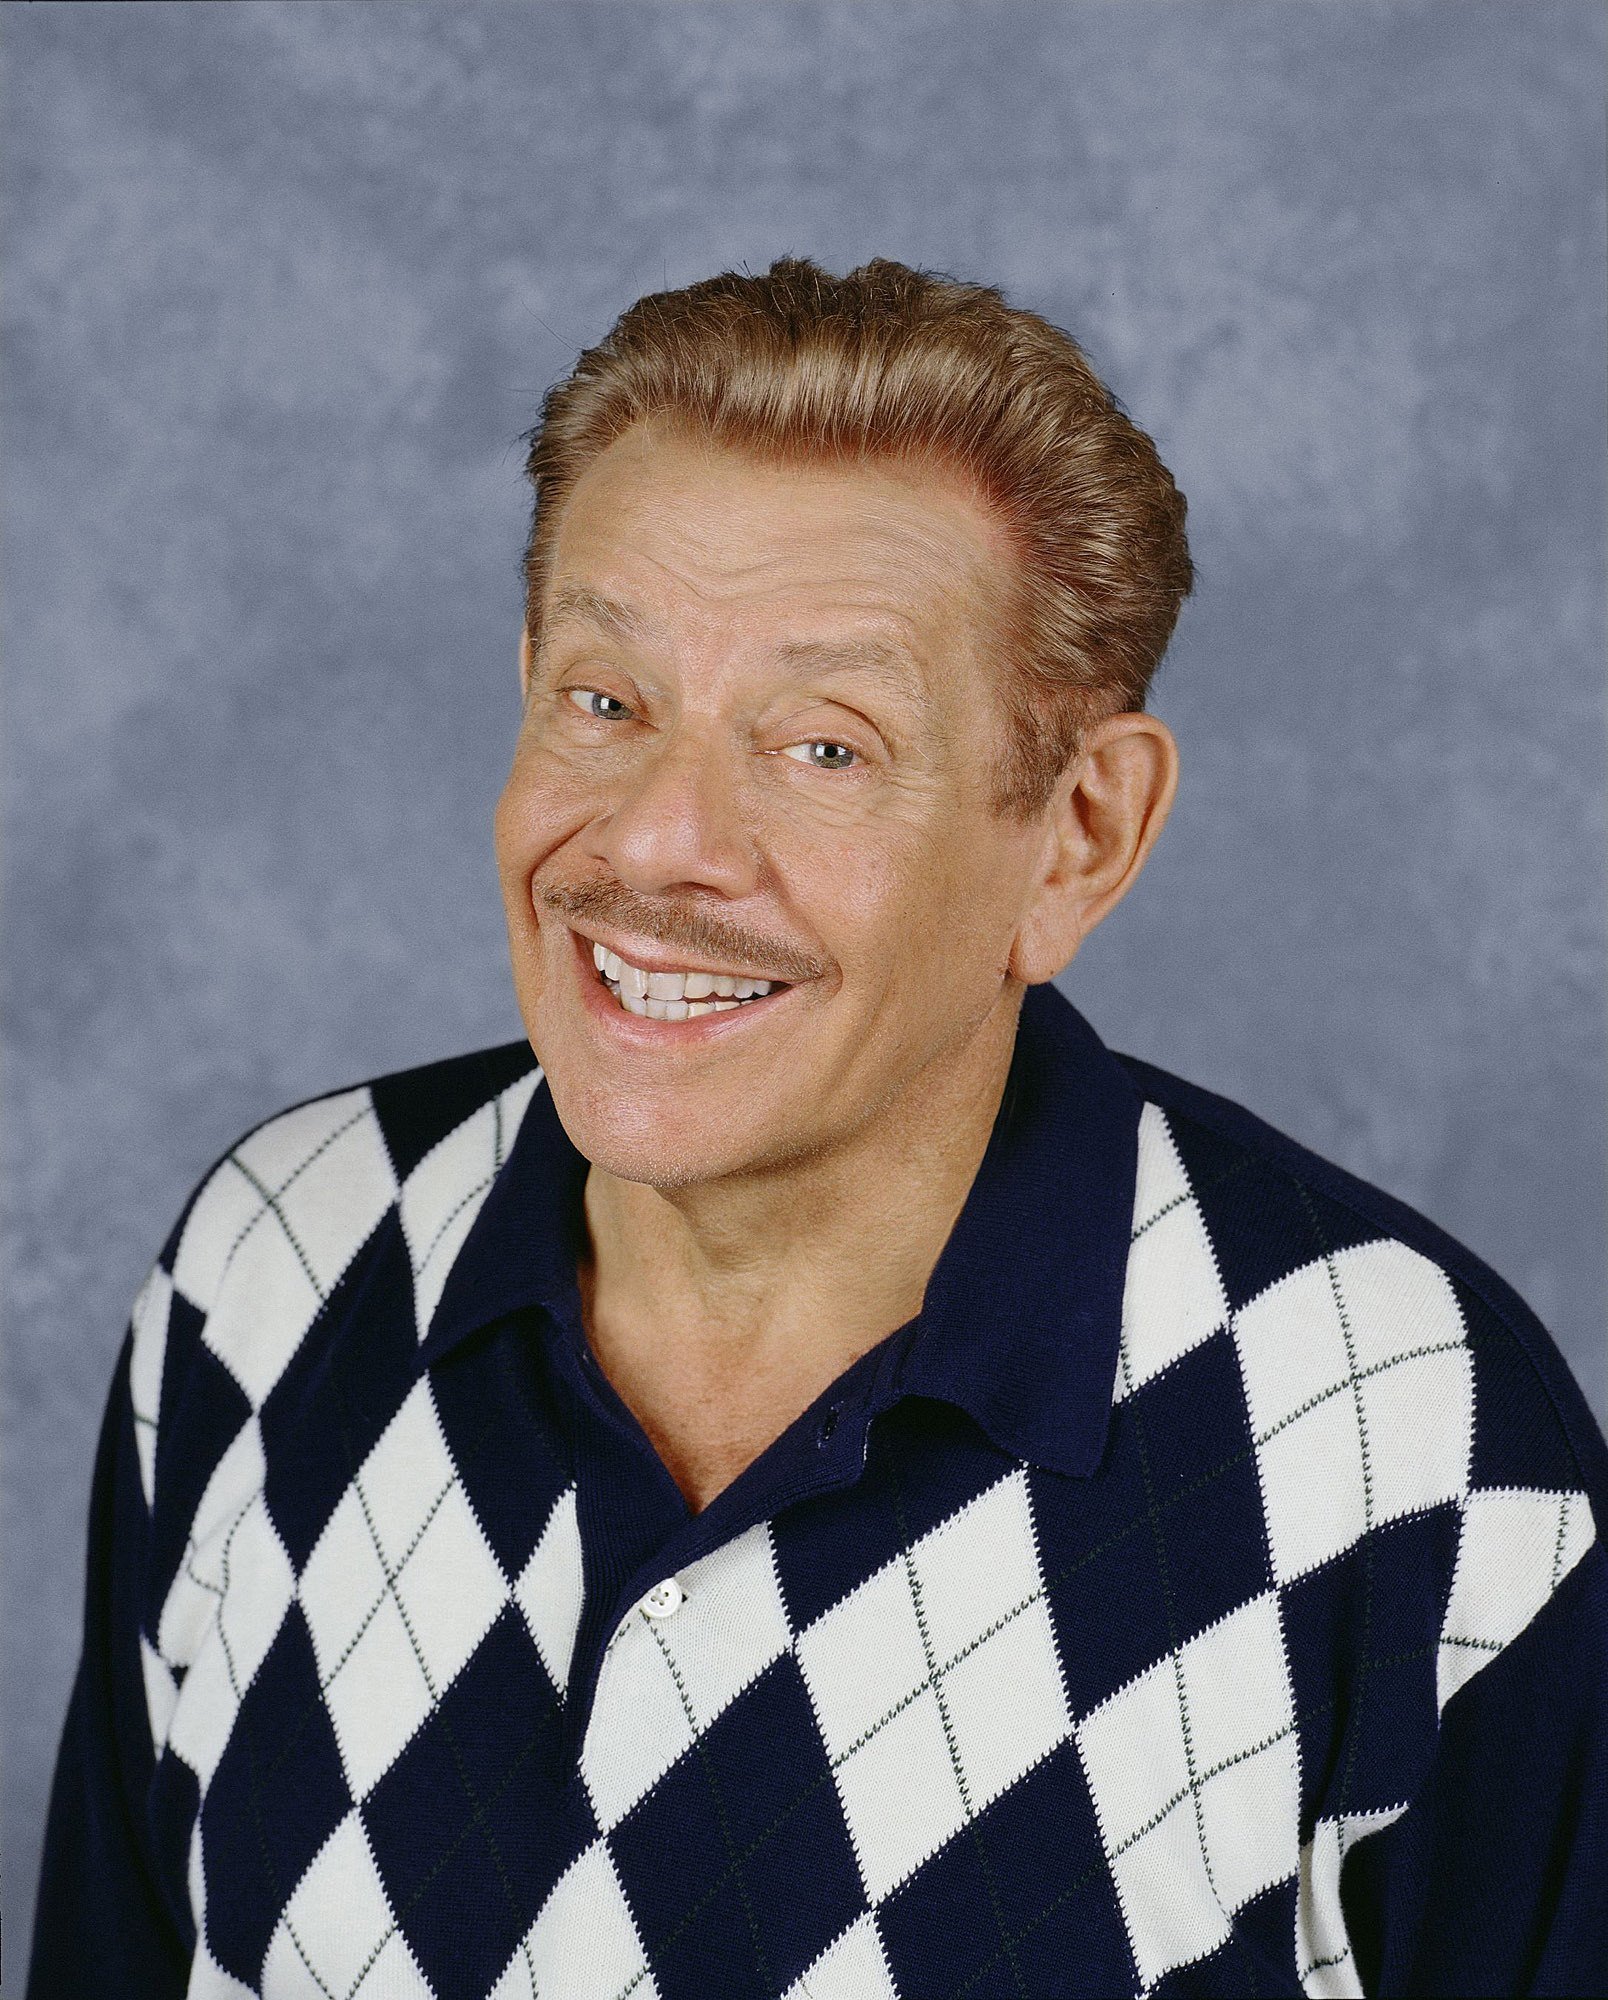 Jerry Stiller as Arthur on "The King of Queens" in July 2005 | Source: Getty Images